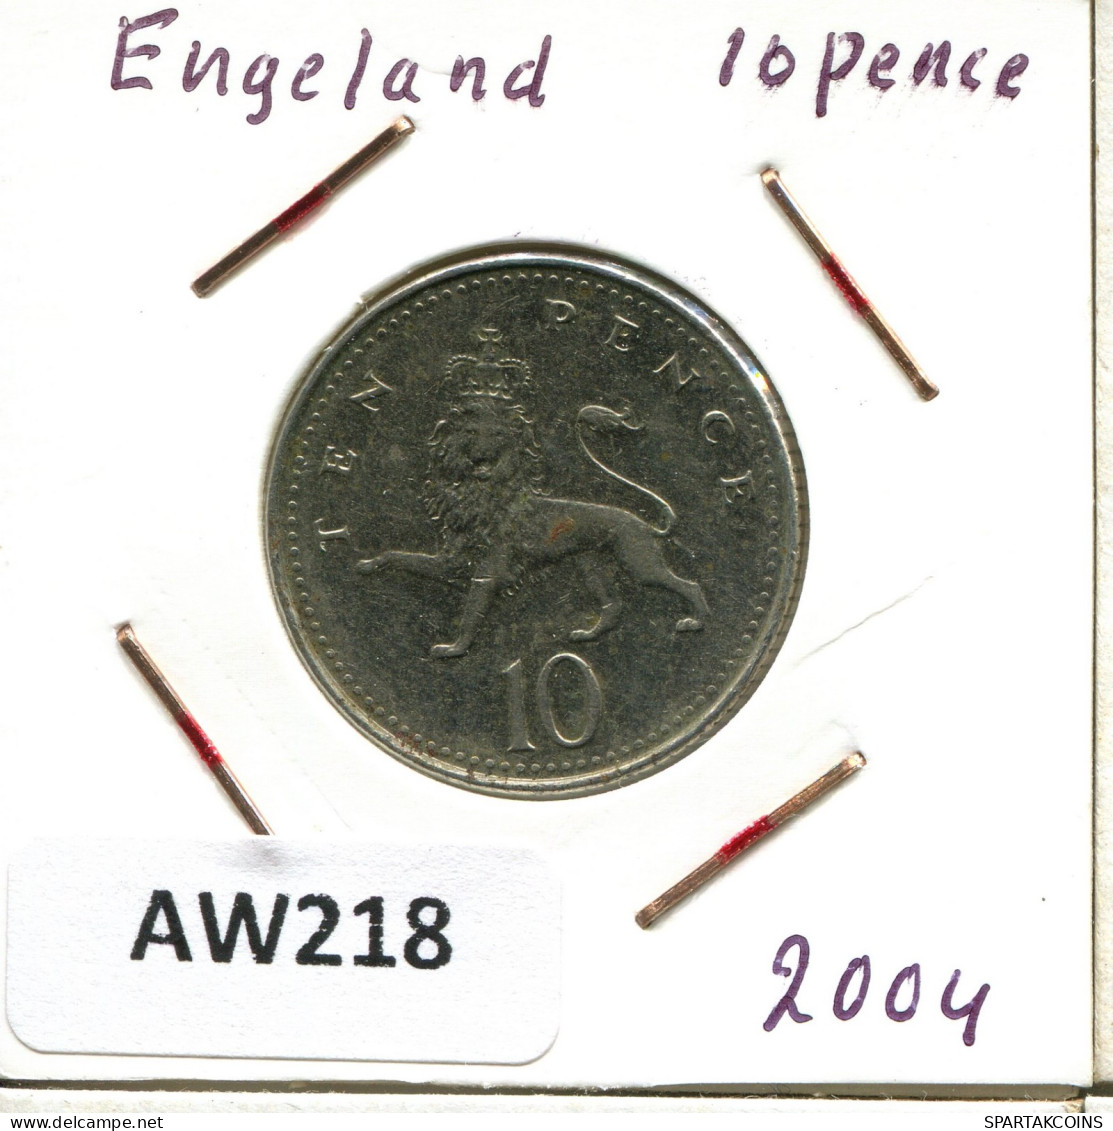 10 PENCE 2004 UK GREAT BRITAIN Coin #AW218.U.A - 10 Pence & 10 New Pence